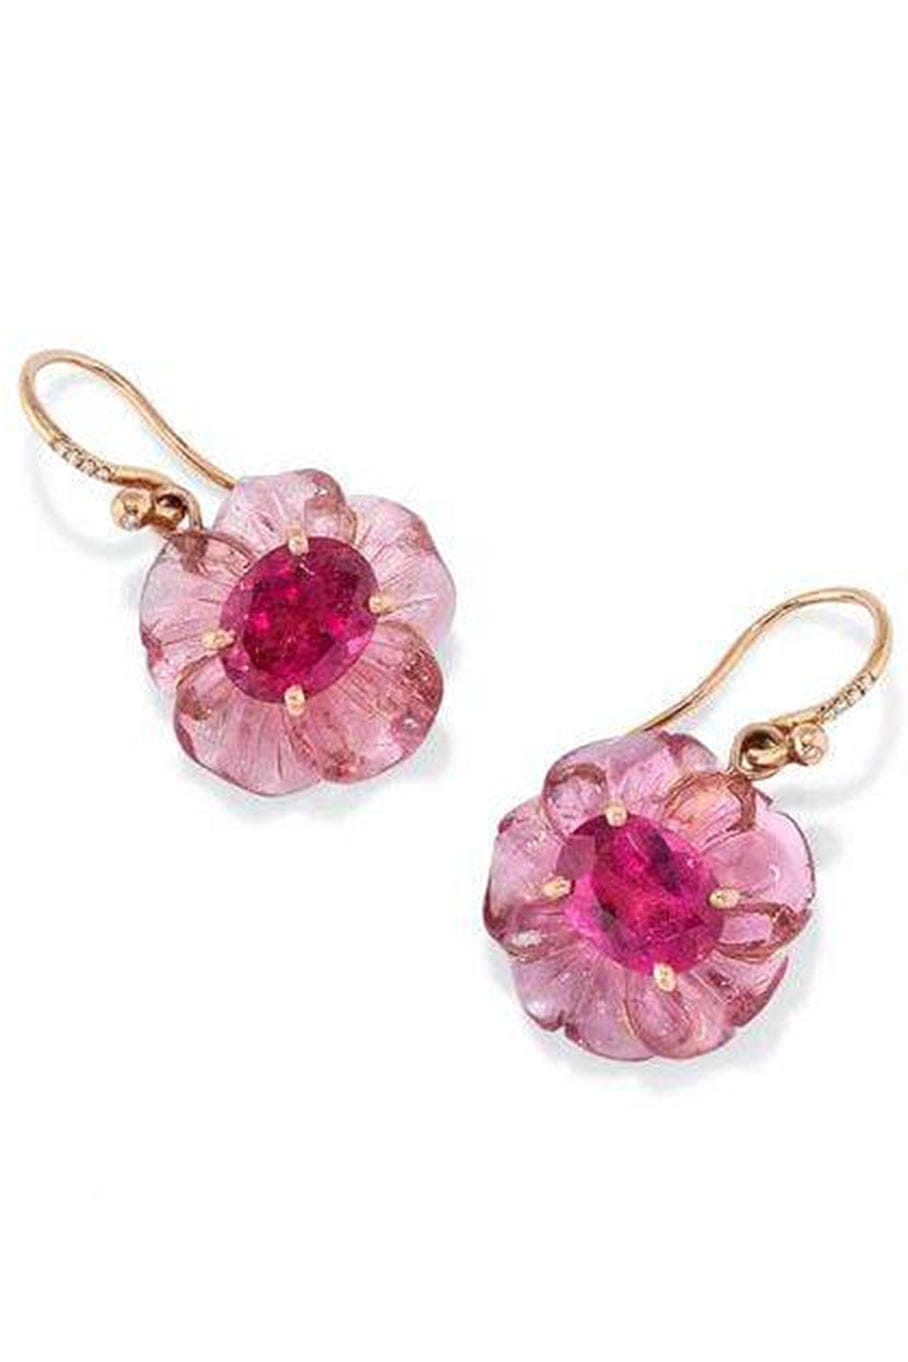 IRENE NEUWIRTH JEWELRY-Carved Pink Tourmaline Tropical Flower Earrings-ROSE GOLD